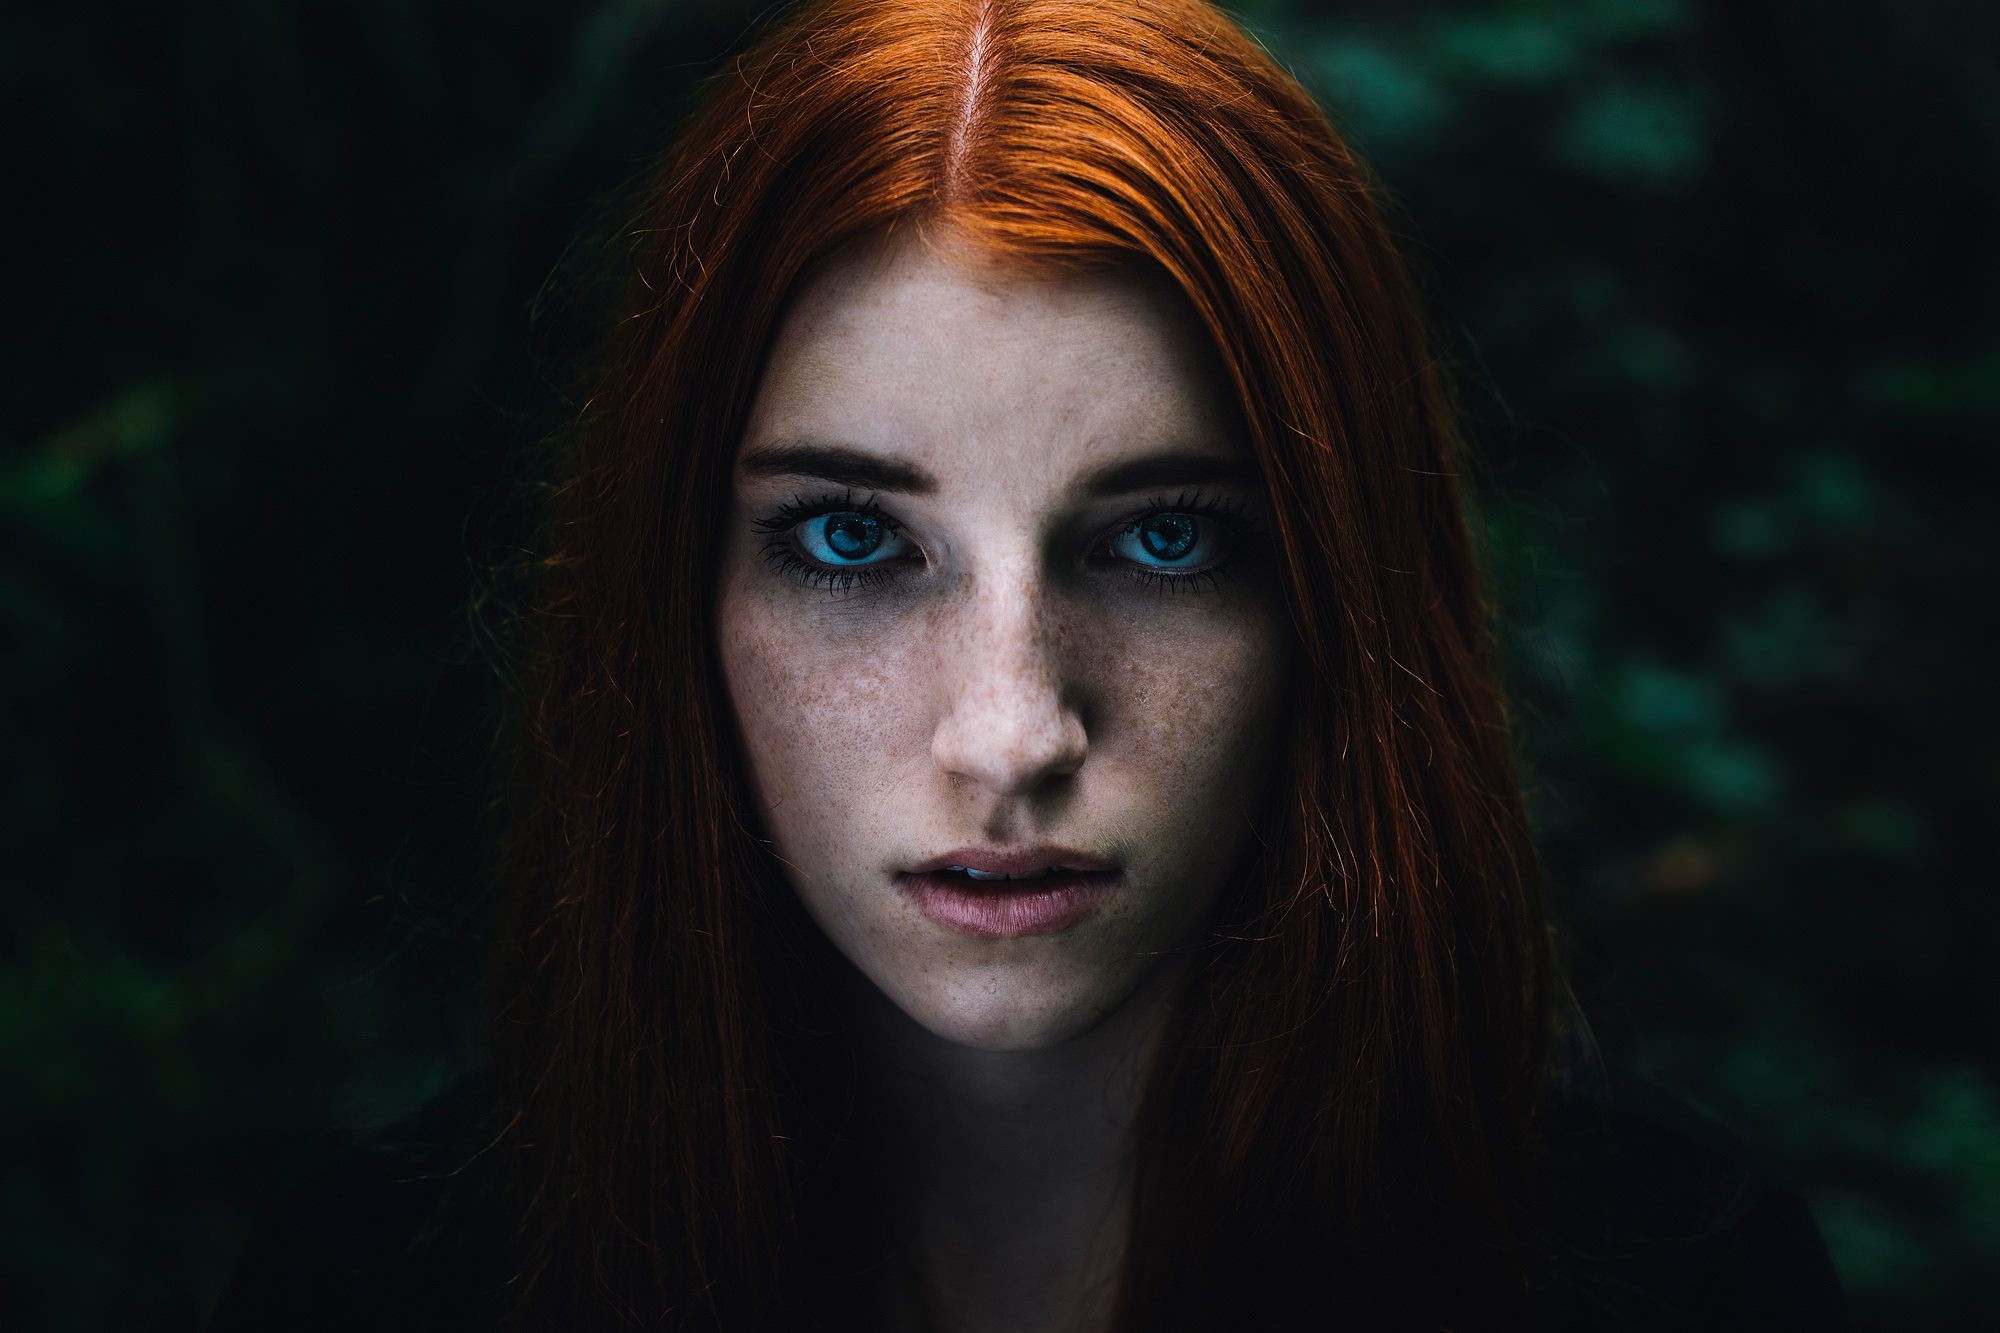 Ginger with freckles